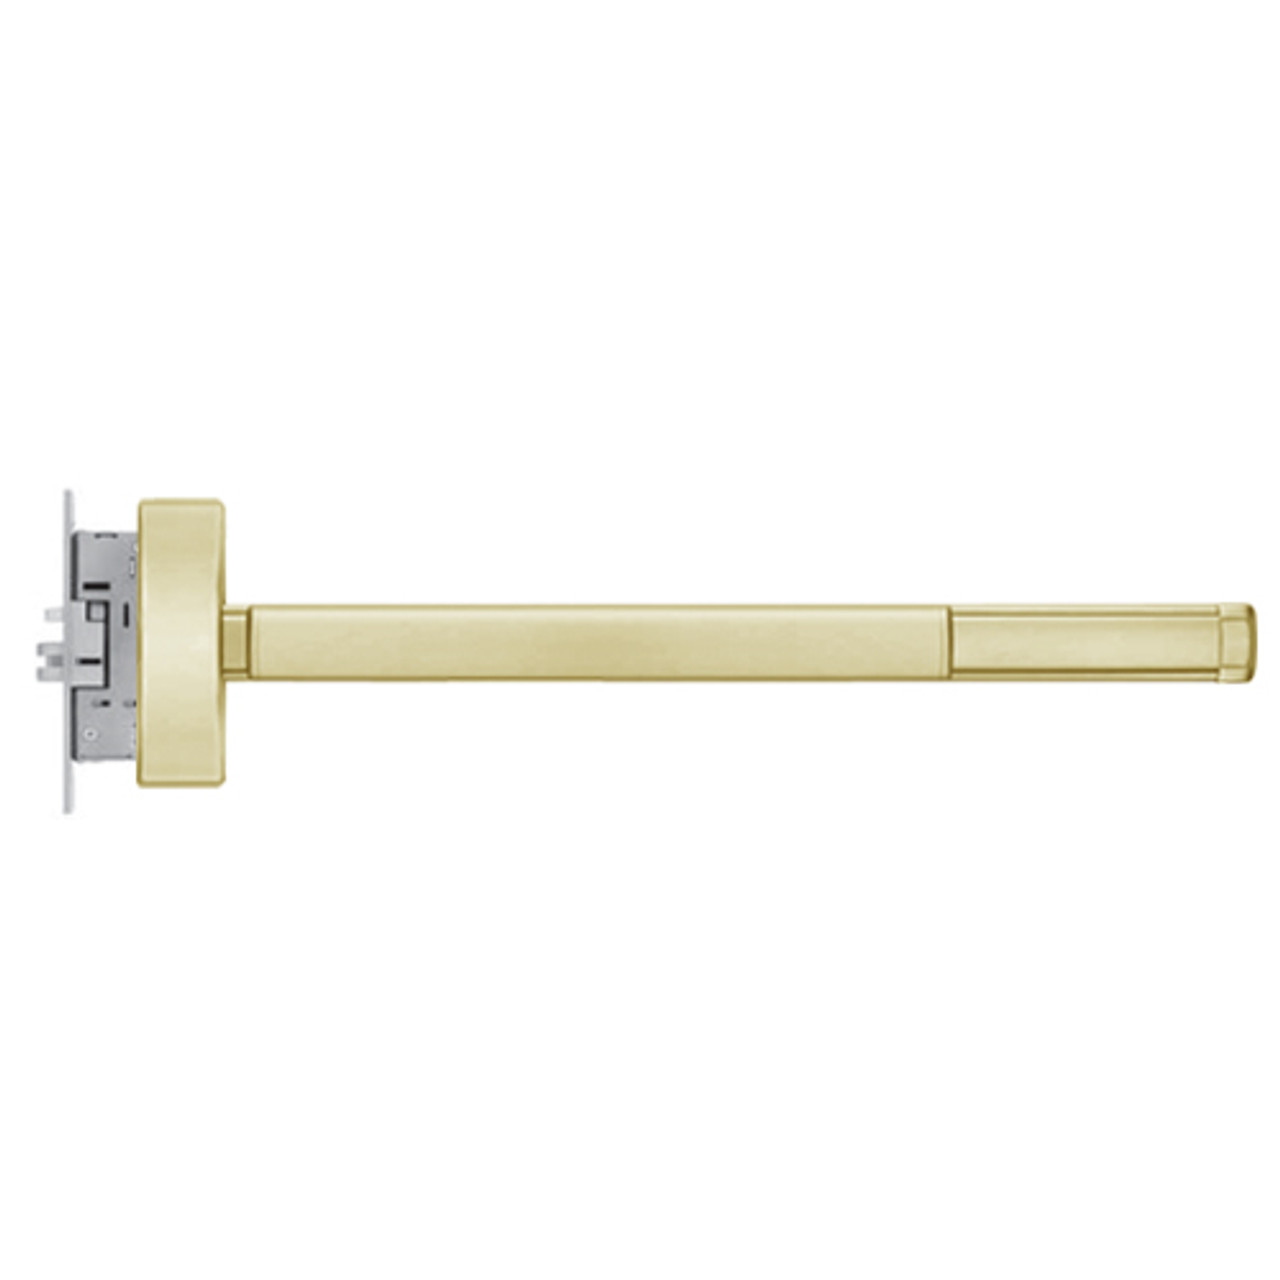 TS2308-LHR-606-36 PHI 2300 Series Apex Mortise Exit Device with Touchbar Monitoring Switch Prepped for Key Controls Lever/Knob in Satin Brass Finish